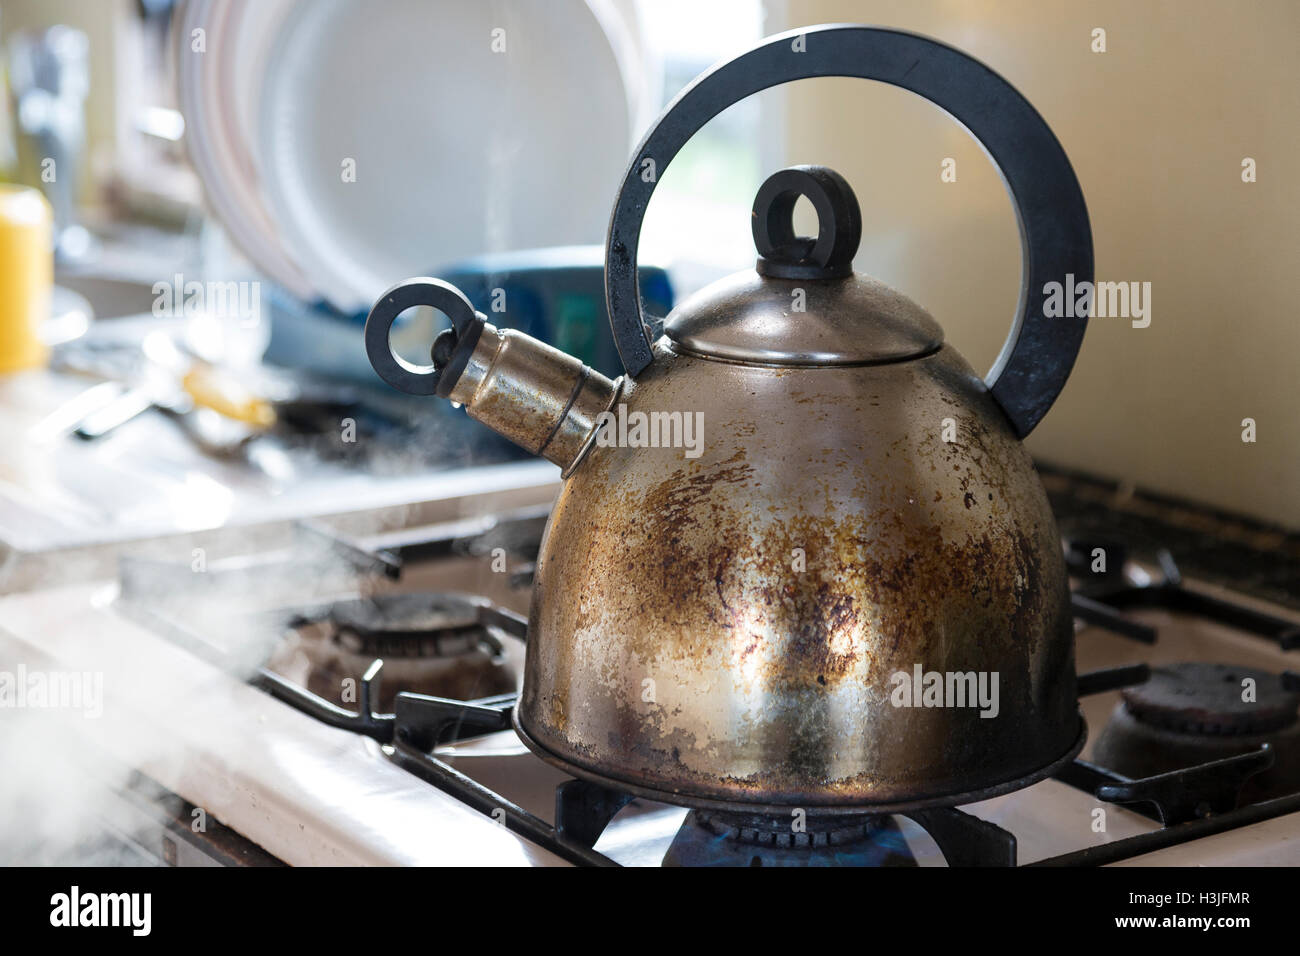 Old stainless steel kettle boiling on gas stove in caravan (trailer). Stock Photo